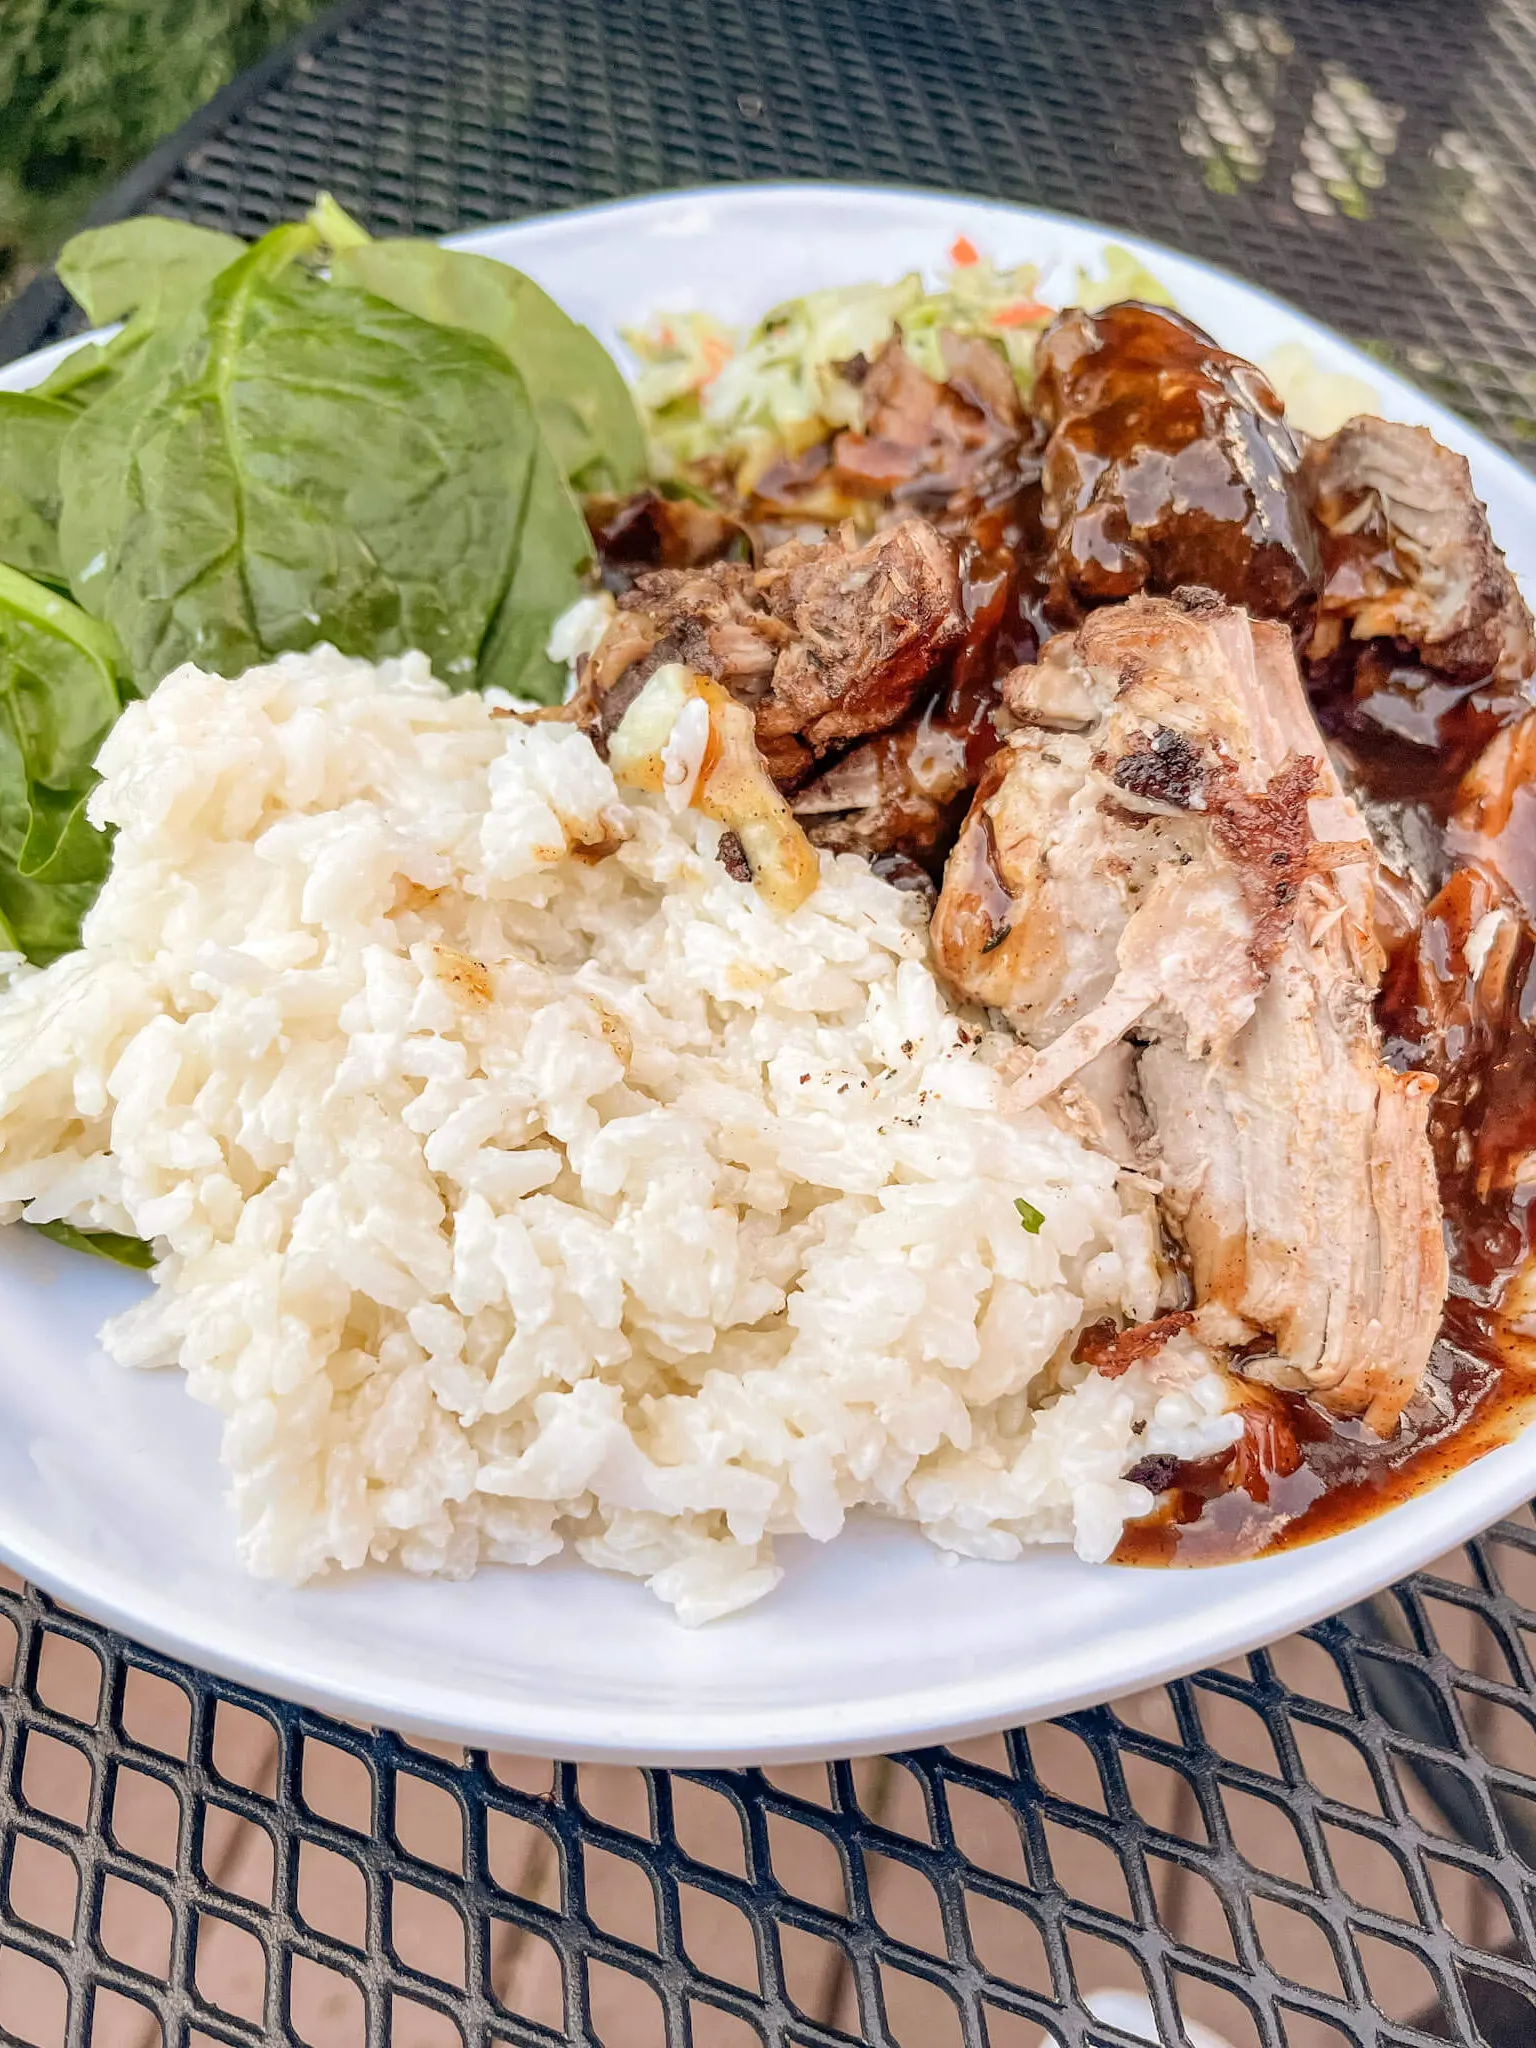 Pork and rice at Wild Thyme Cafe